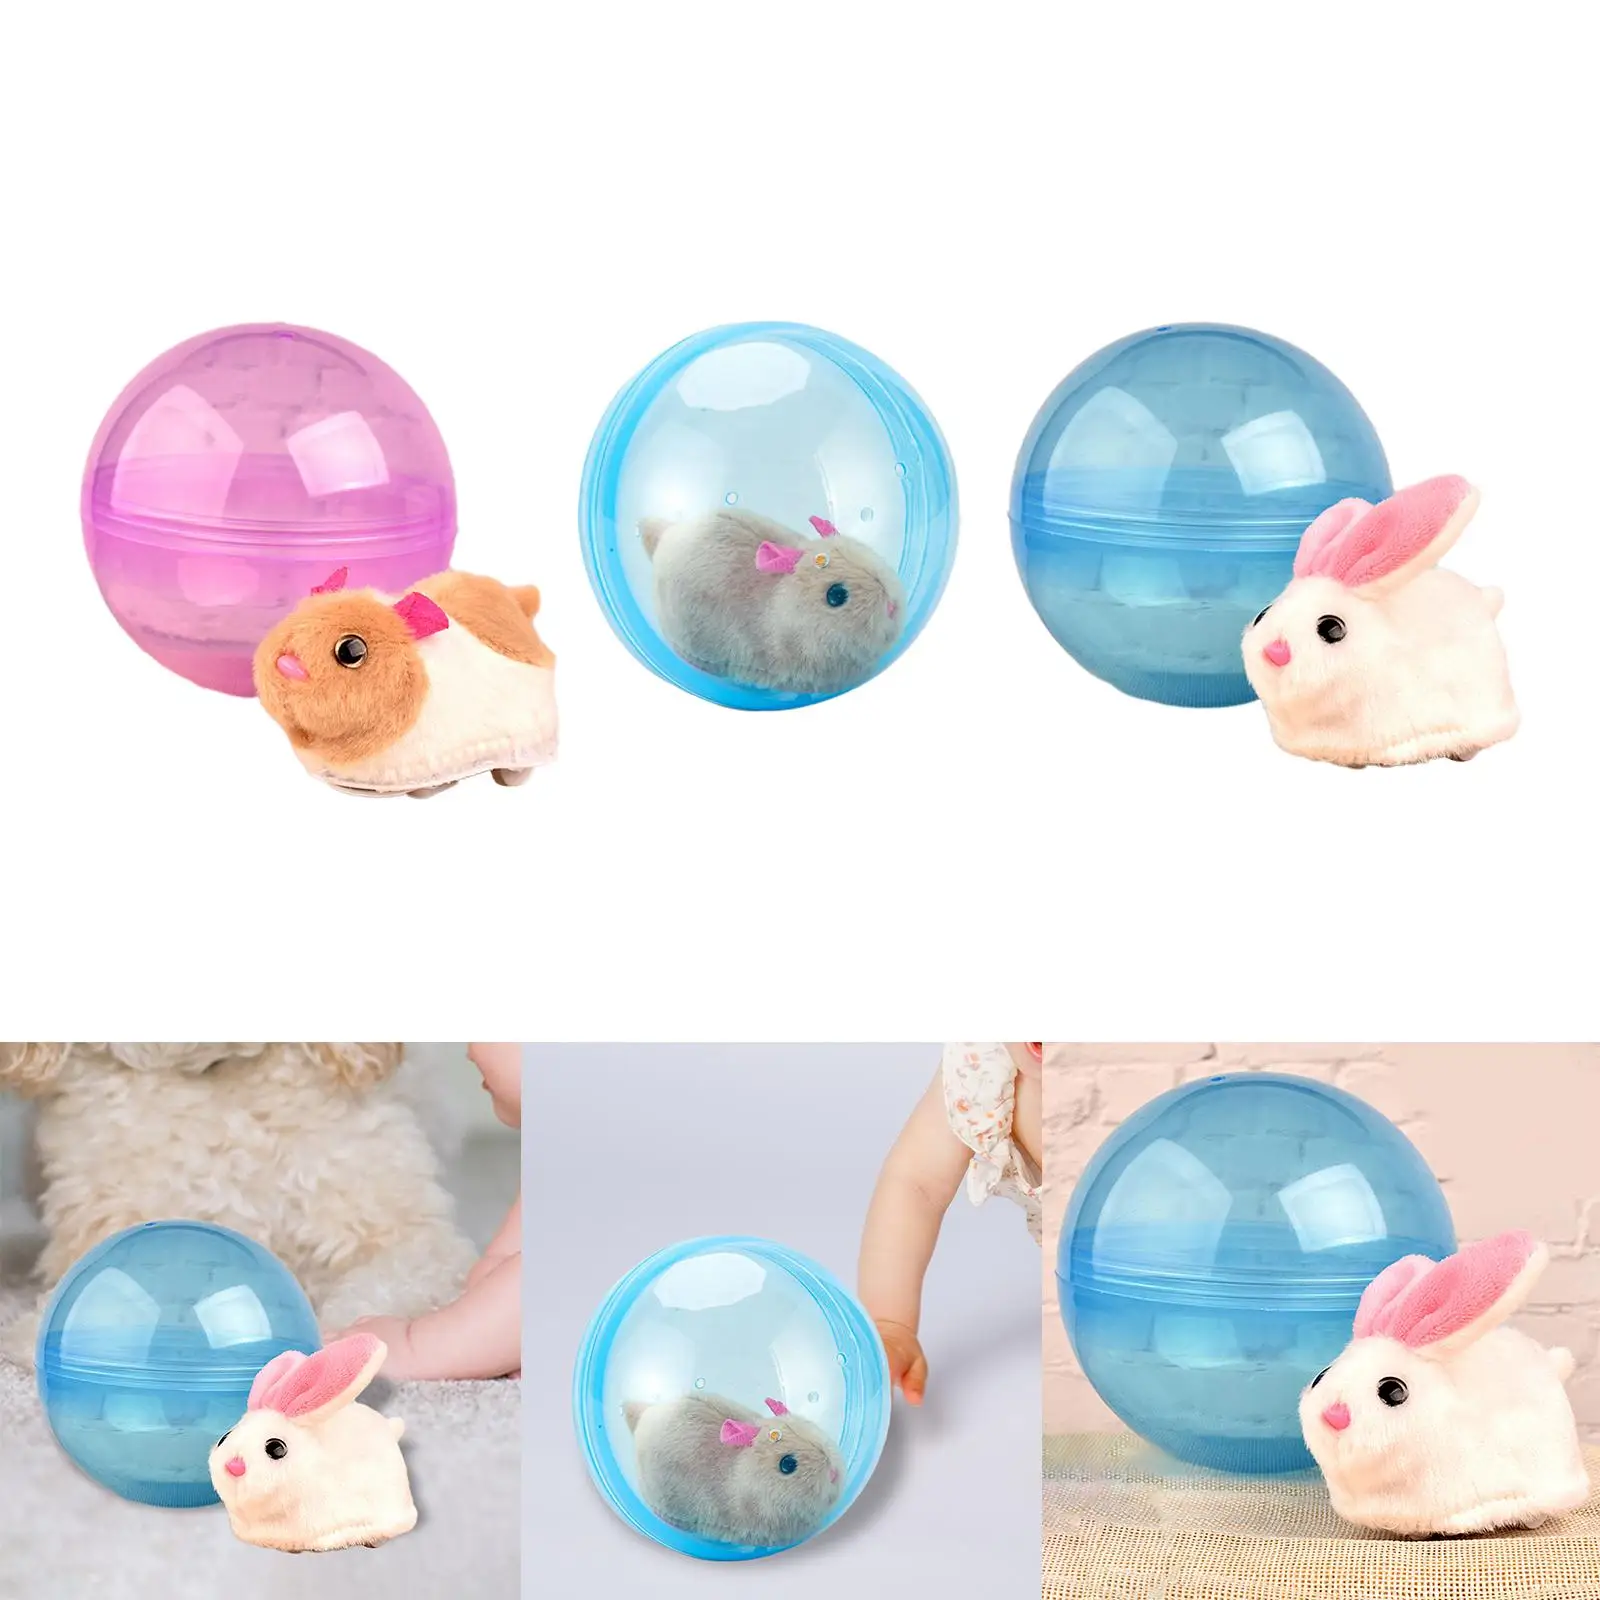 Ball Toys Interactive Plush Animals Toys for Children Toddlers Holiday Gifts